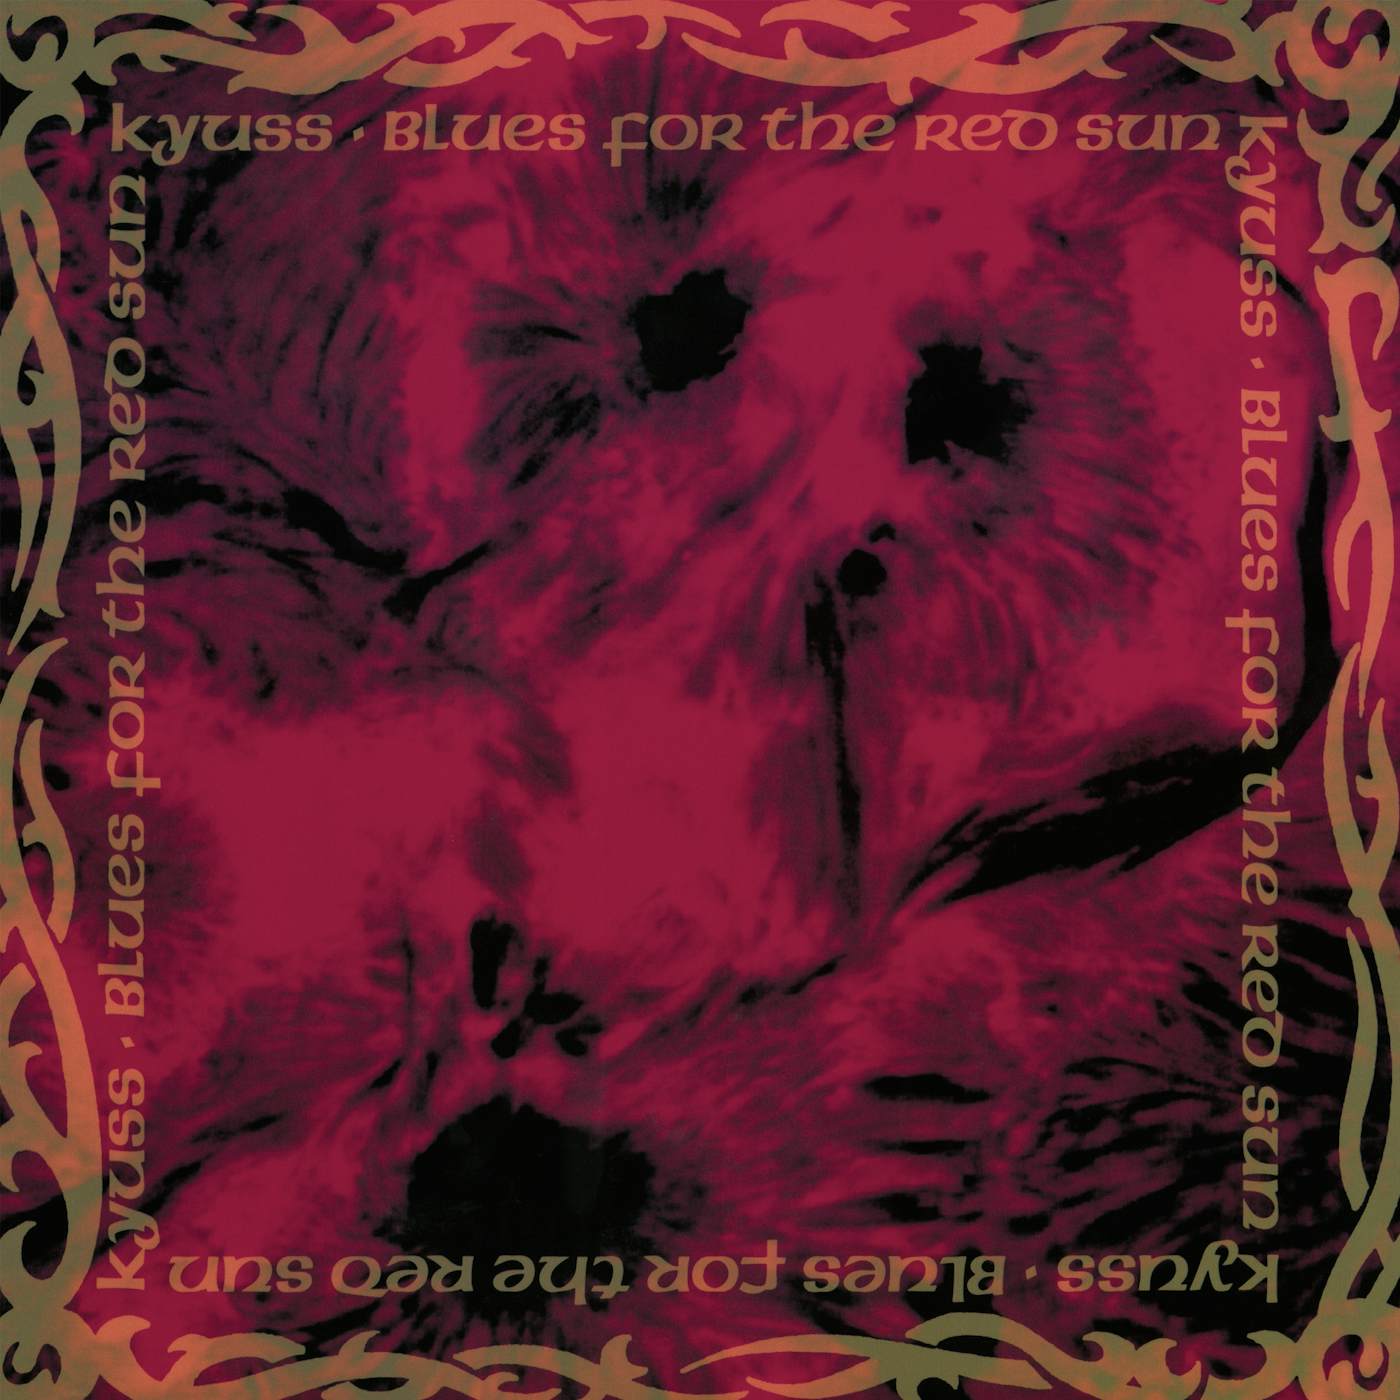 Kyuss Blues For The Red Sun Vinyl Record